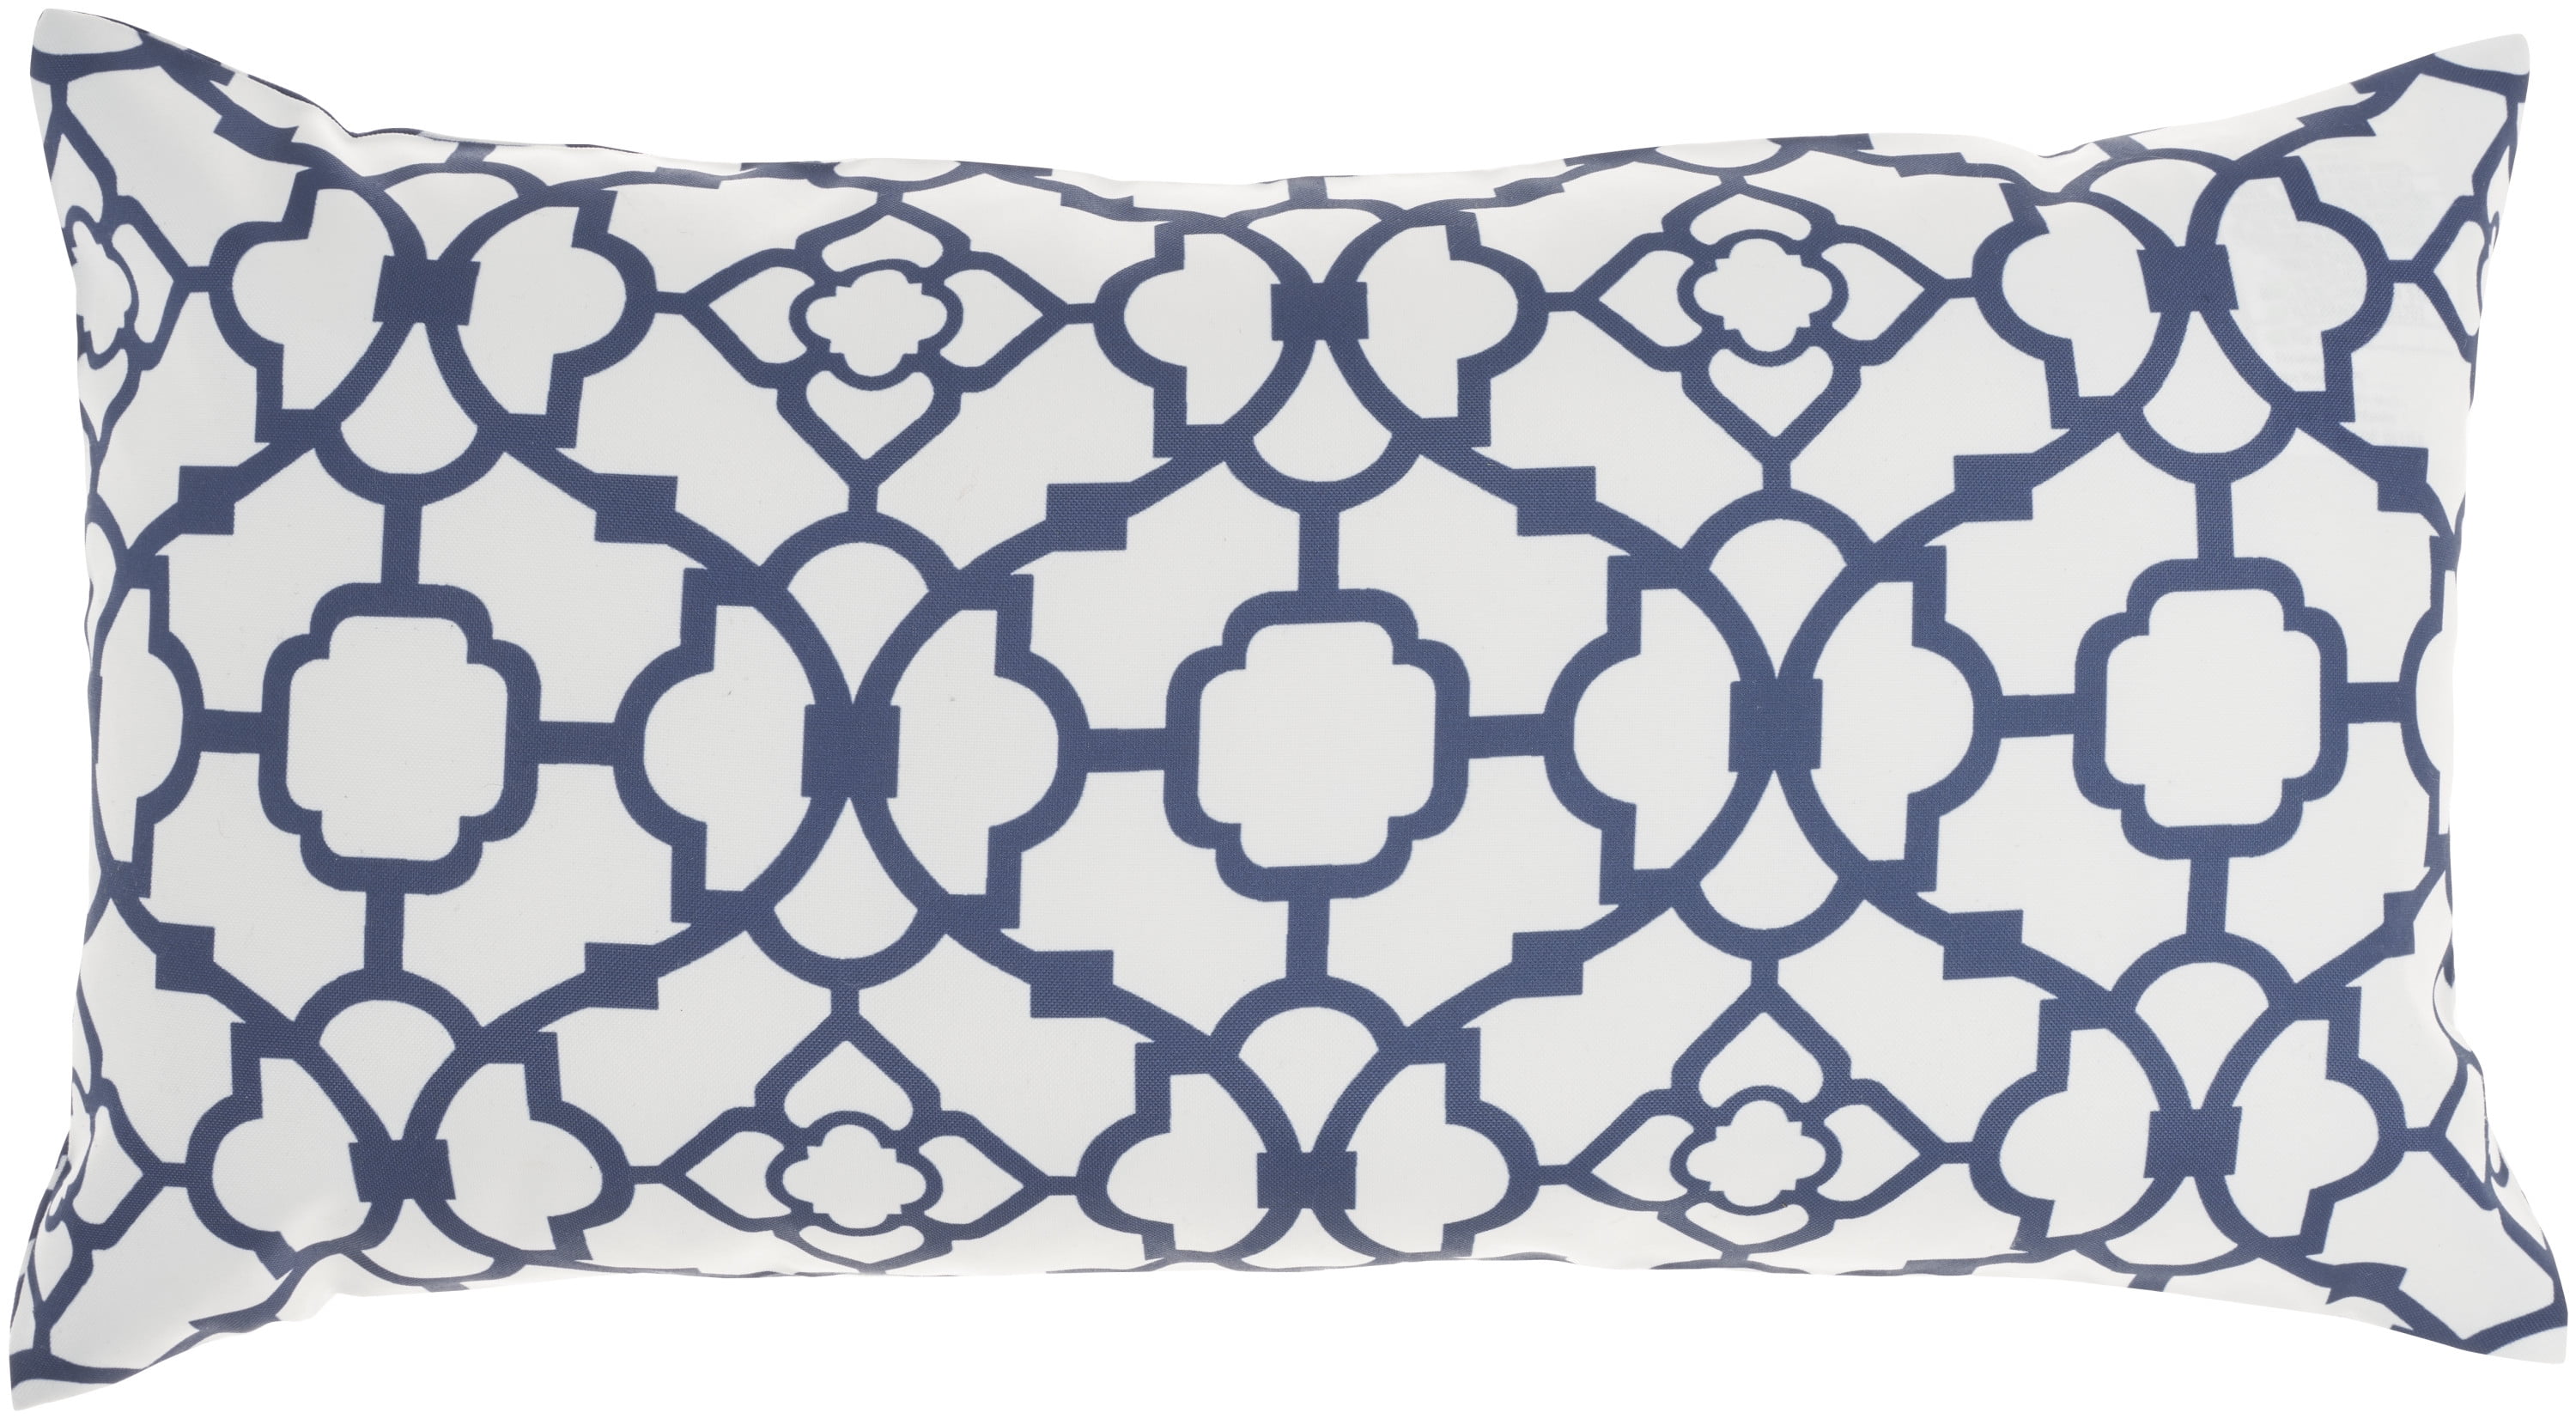 Waverly Pillows Lovely Lattice 20 x 20 Ocean Indoor/Outdoor Washable  Throw Pillow 